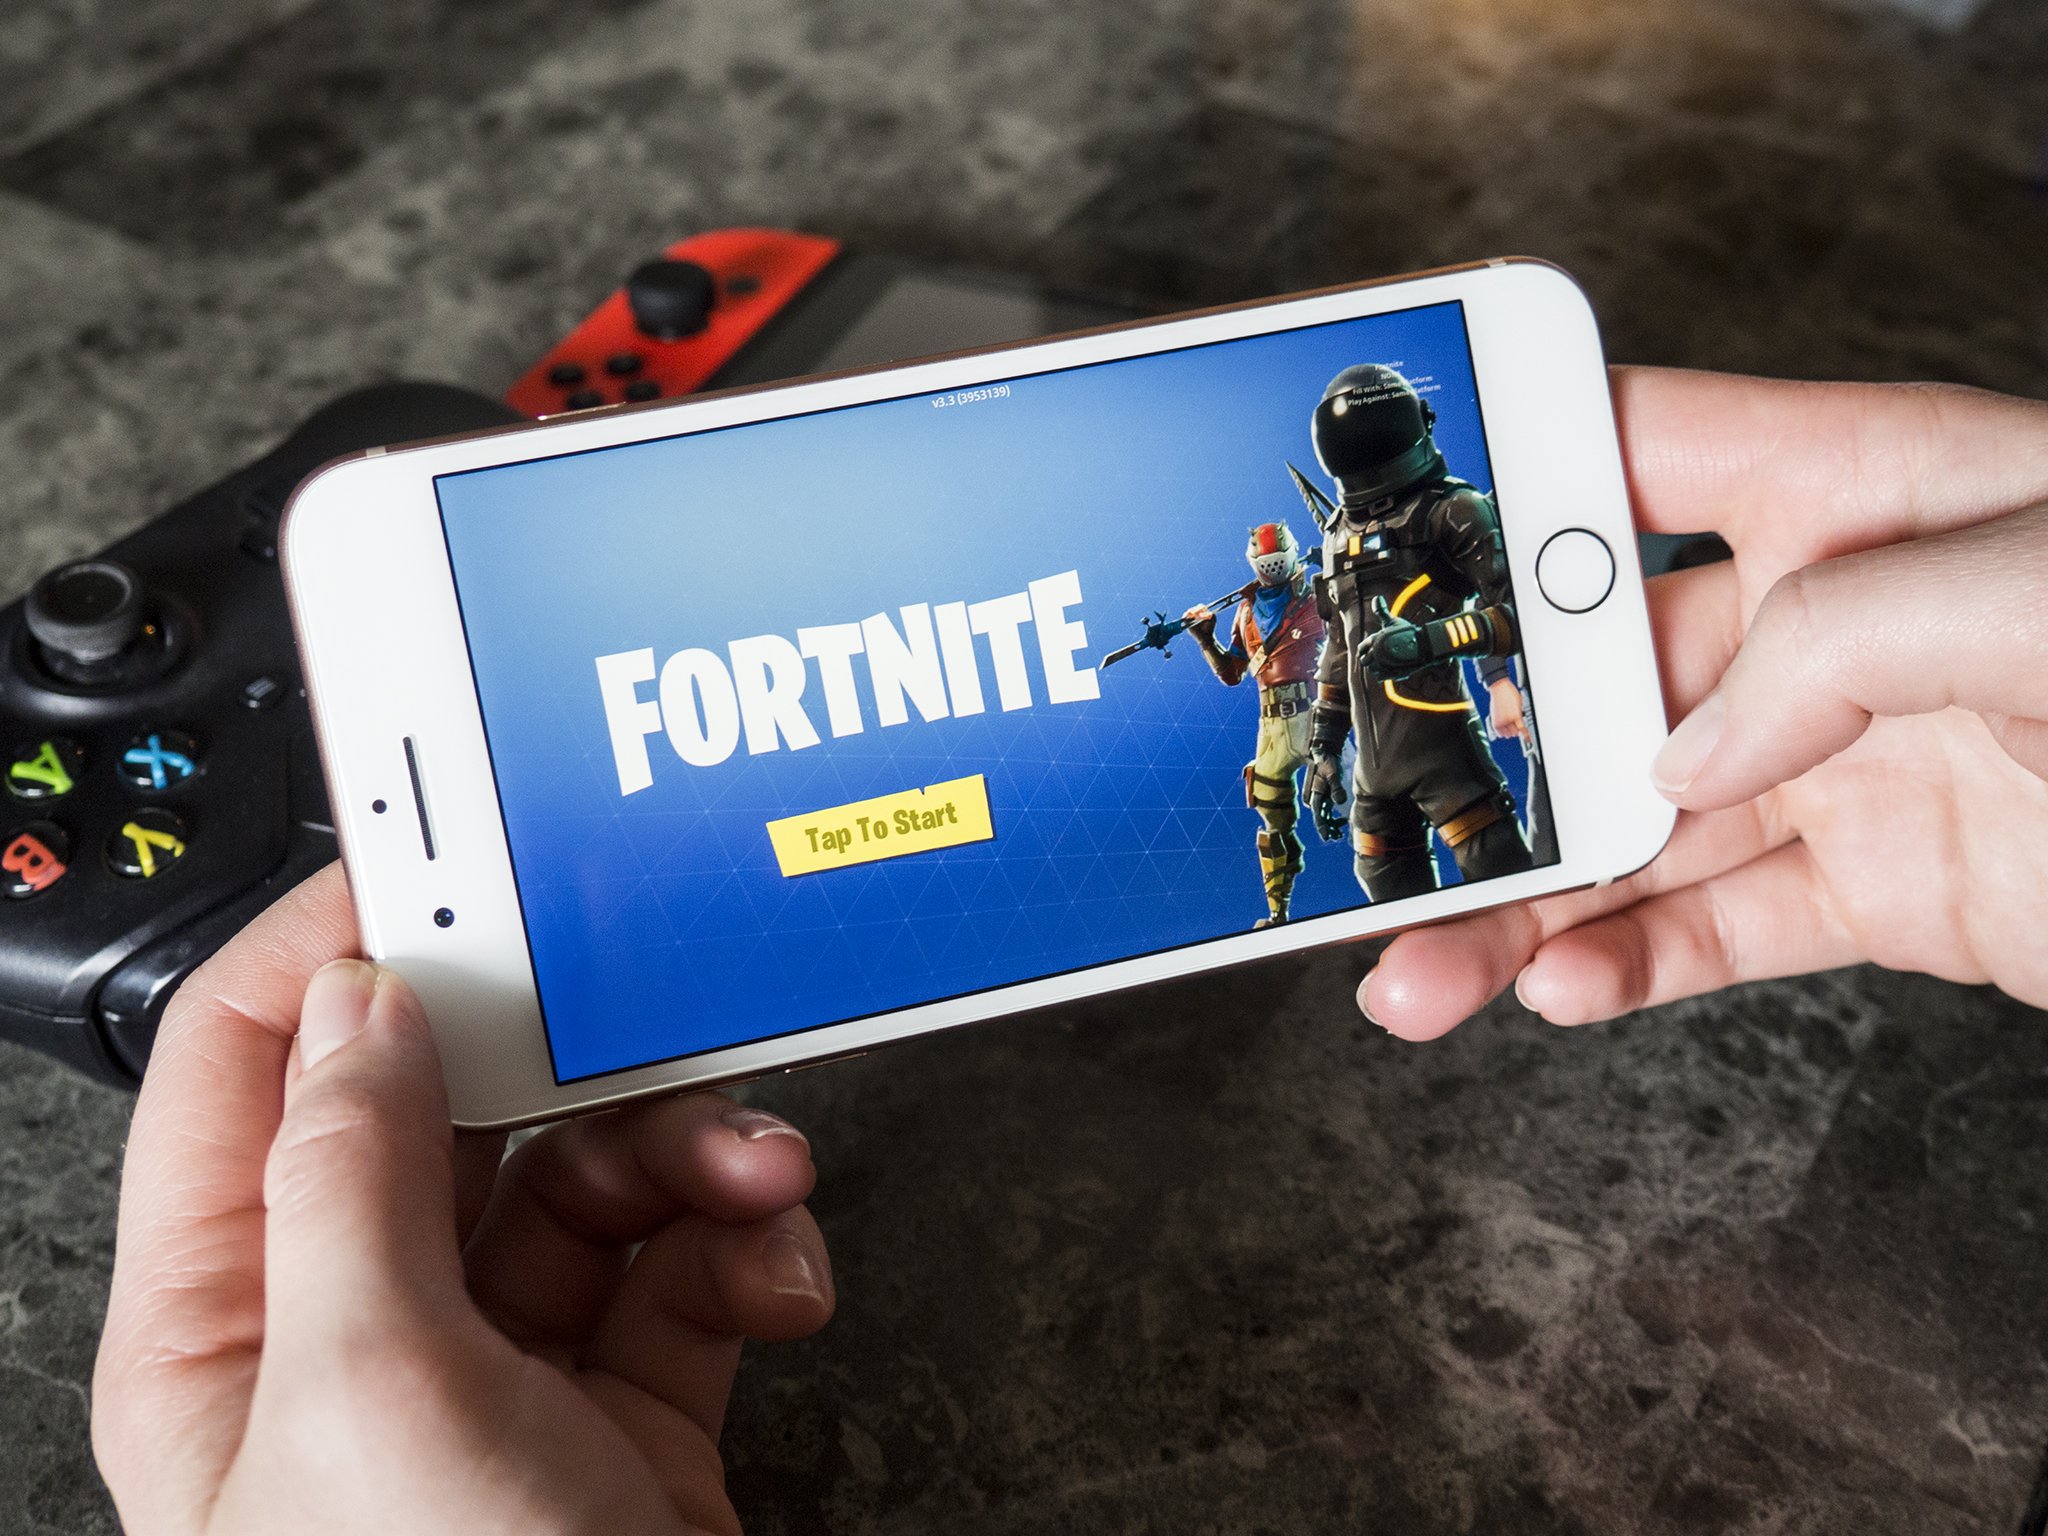 Fortnite' returns to iOS, Android devices via Microsoft's Xbox Cloud Gaming